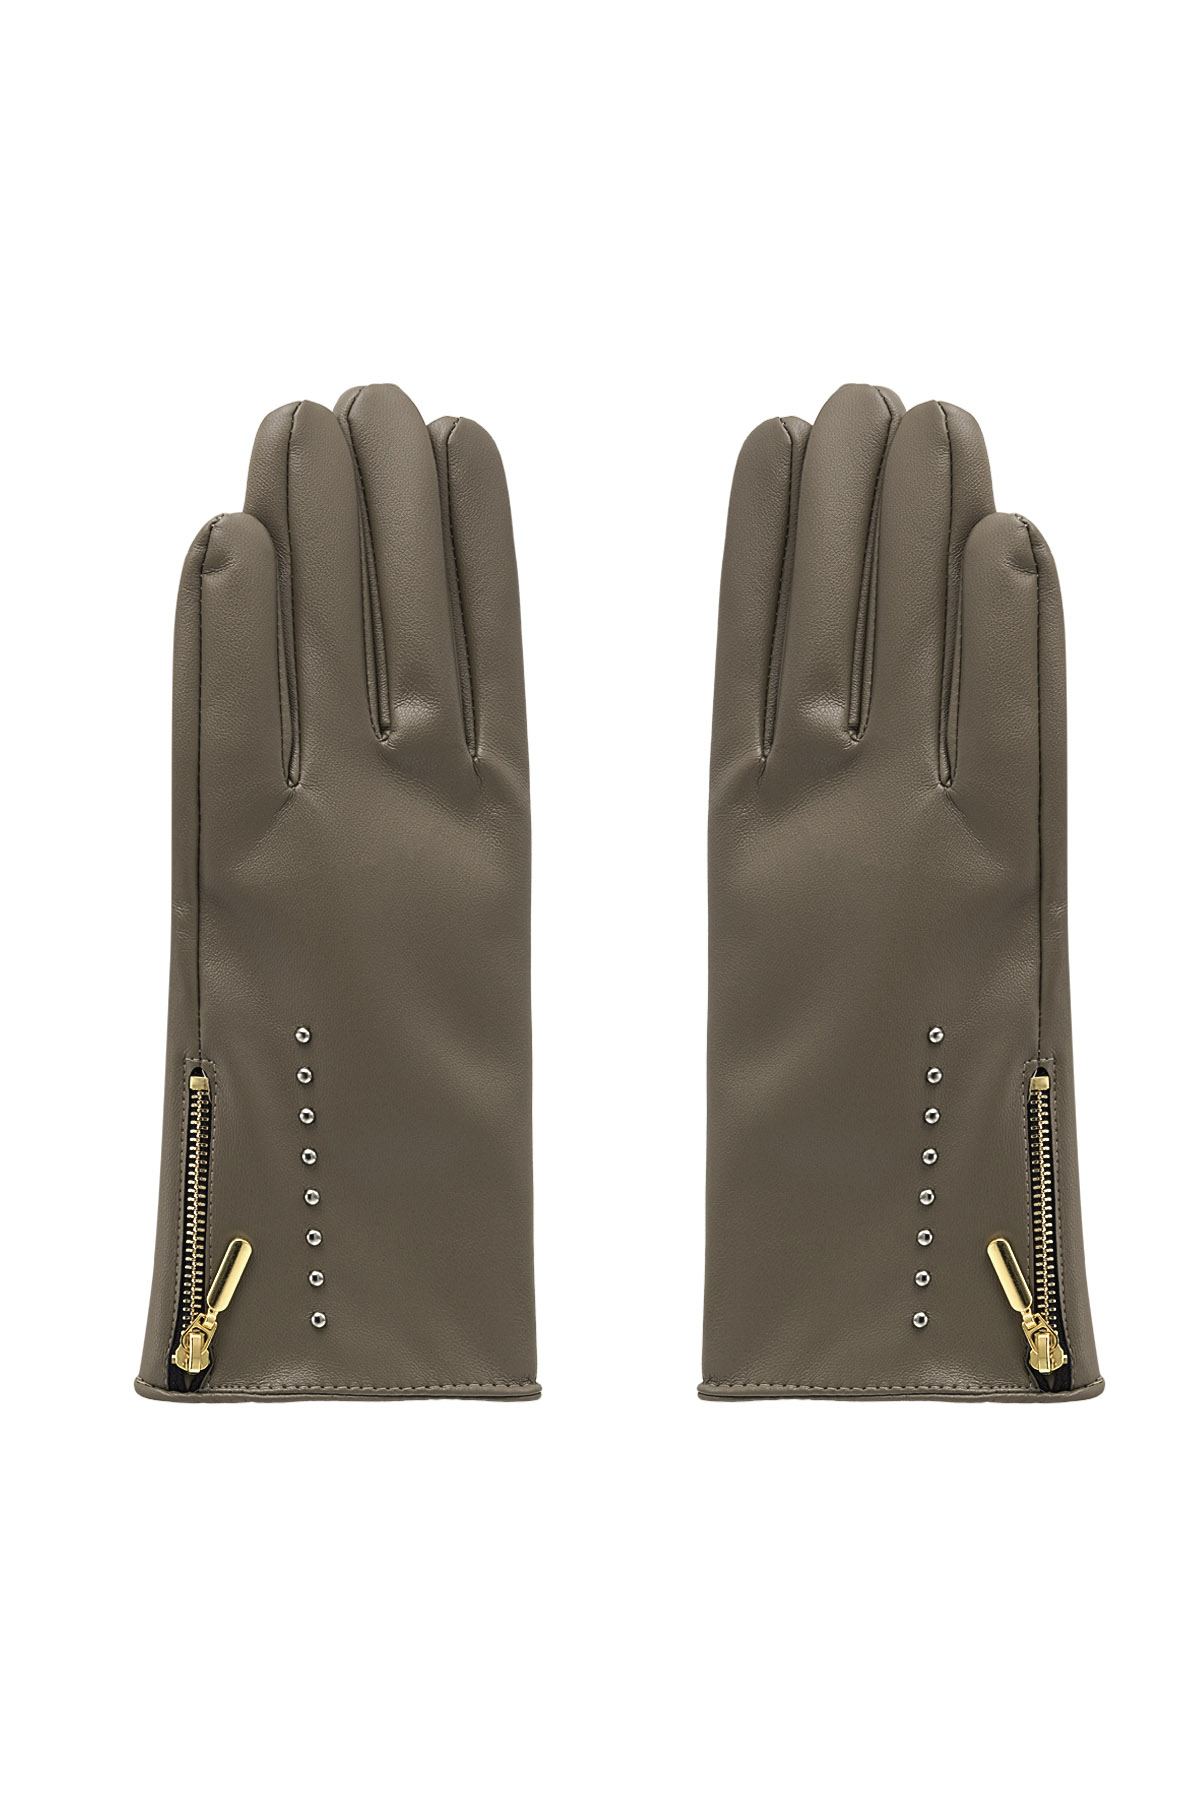 PU gloves with studs and zipper - brown